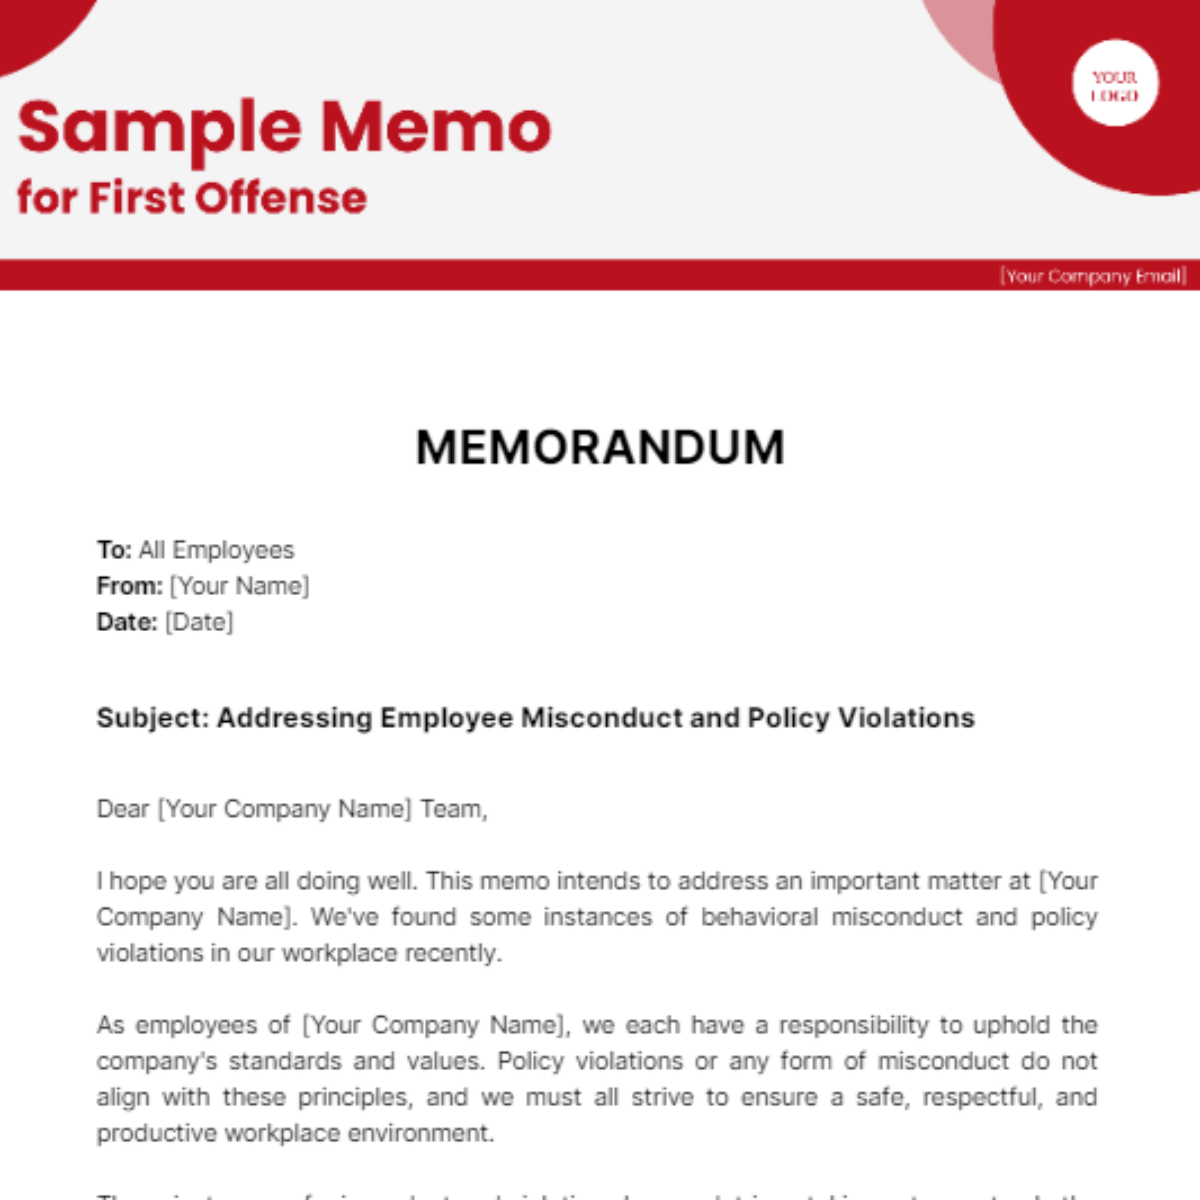 Sample Memo for First Offense